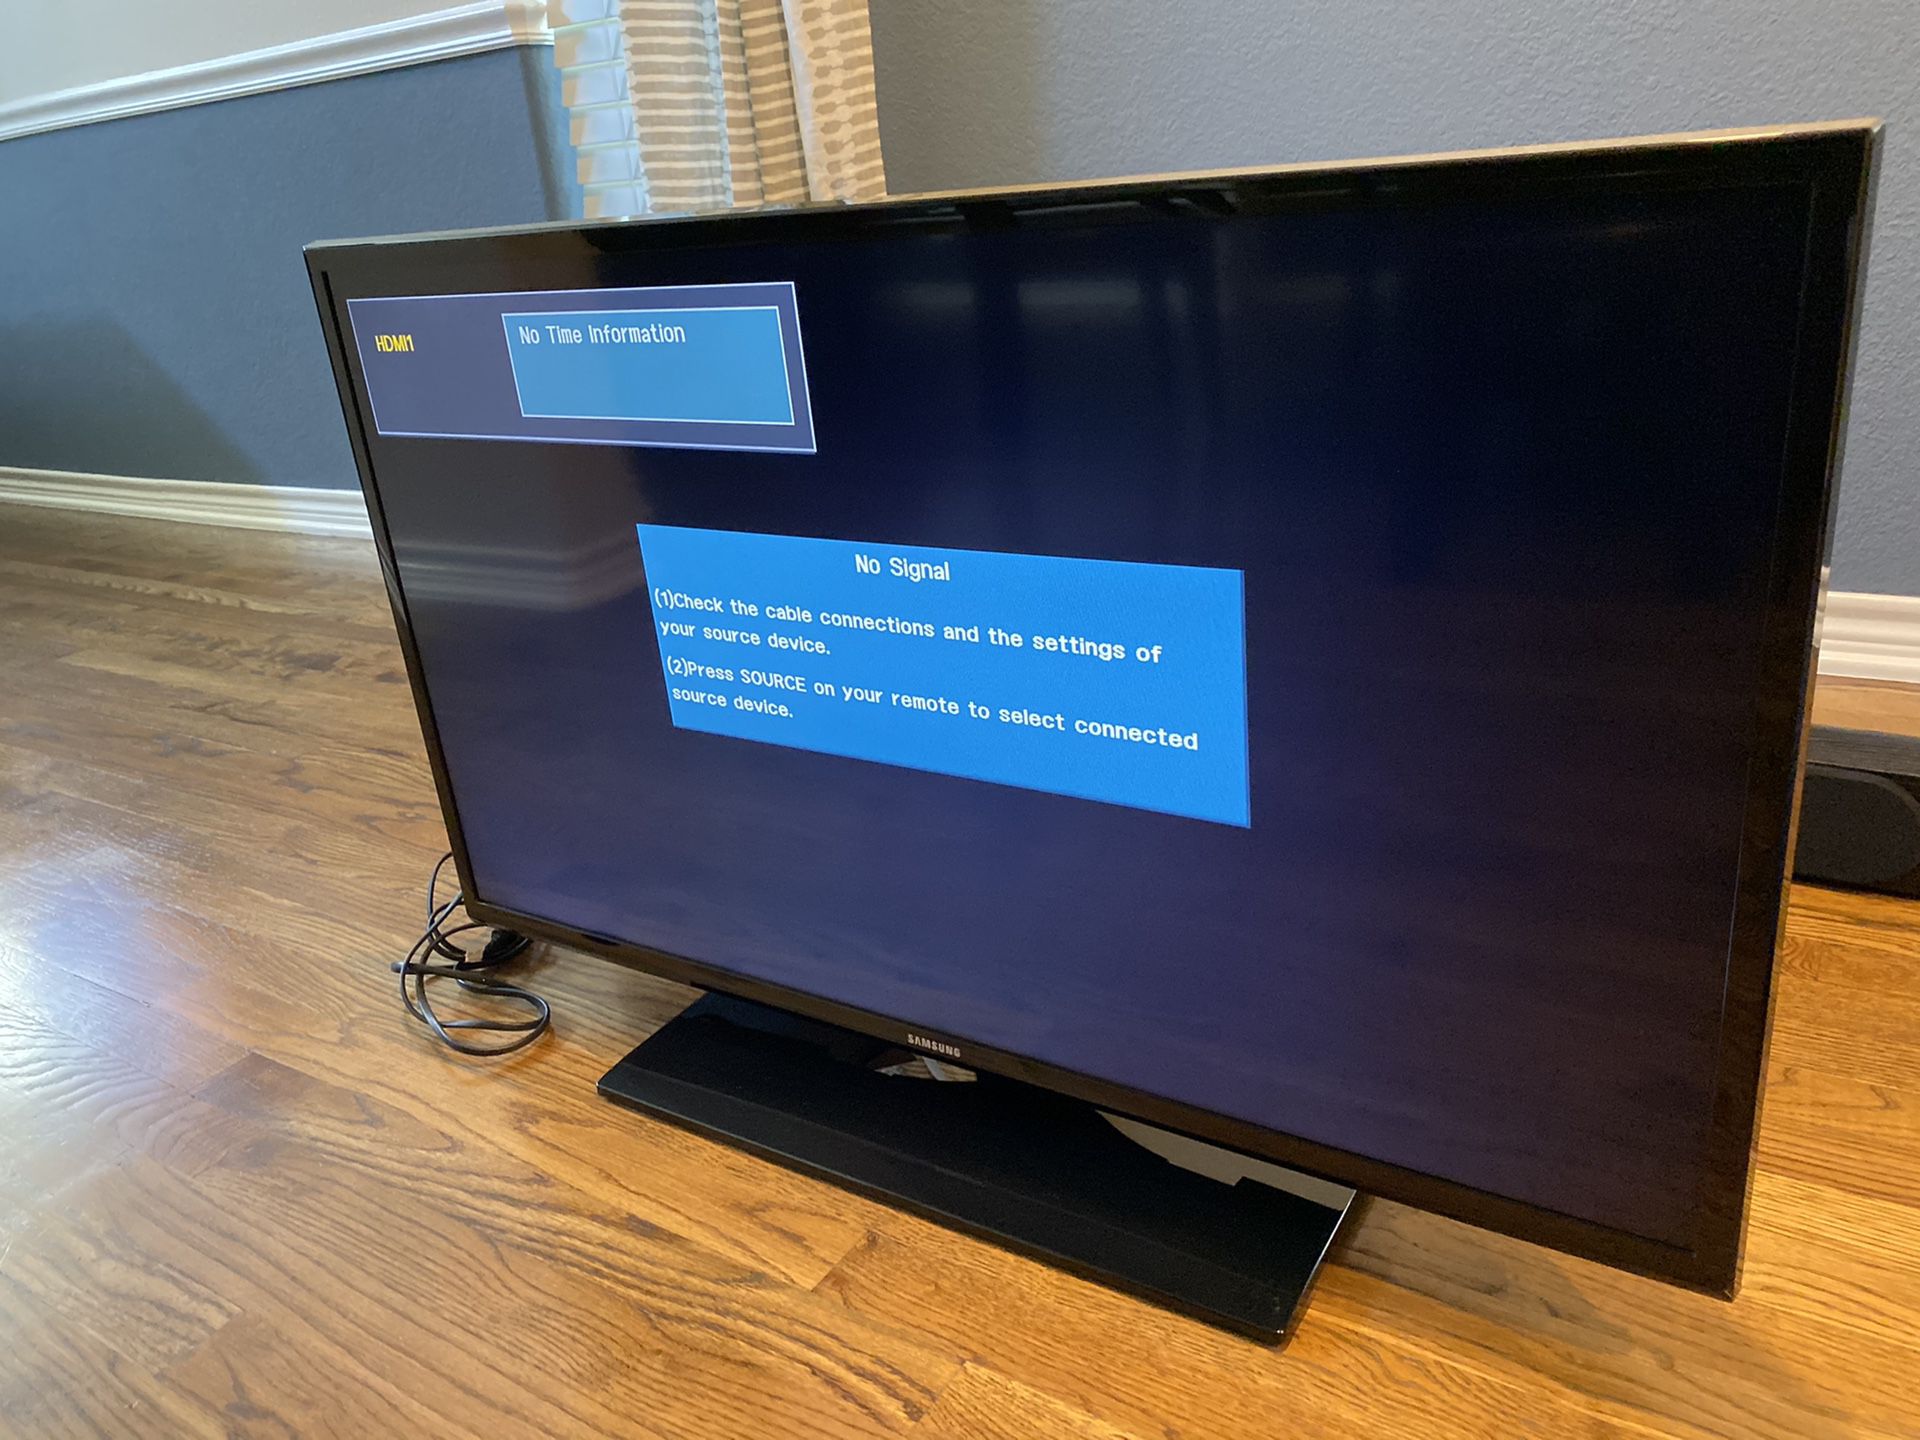 Samsung 40 inch LED TV (Not a Smart TV)